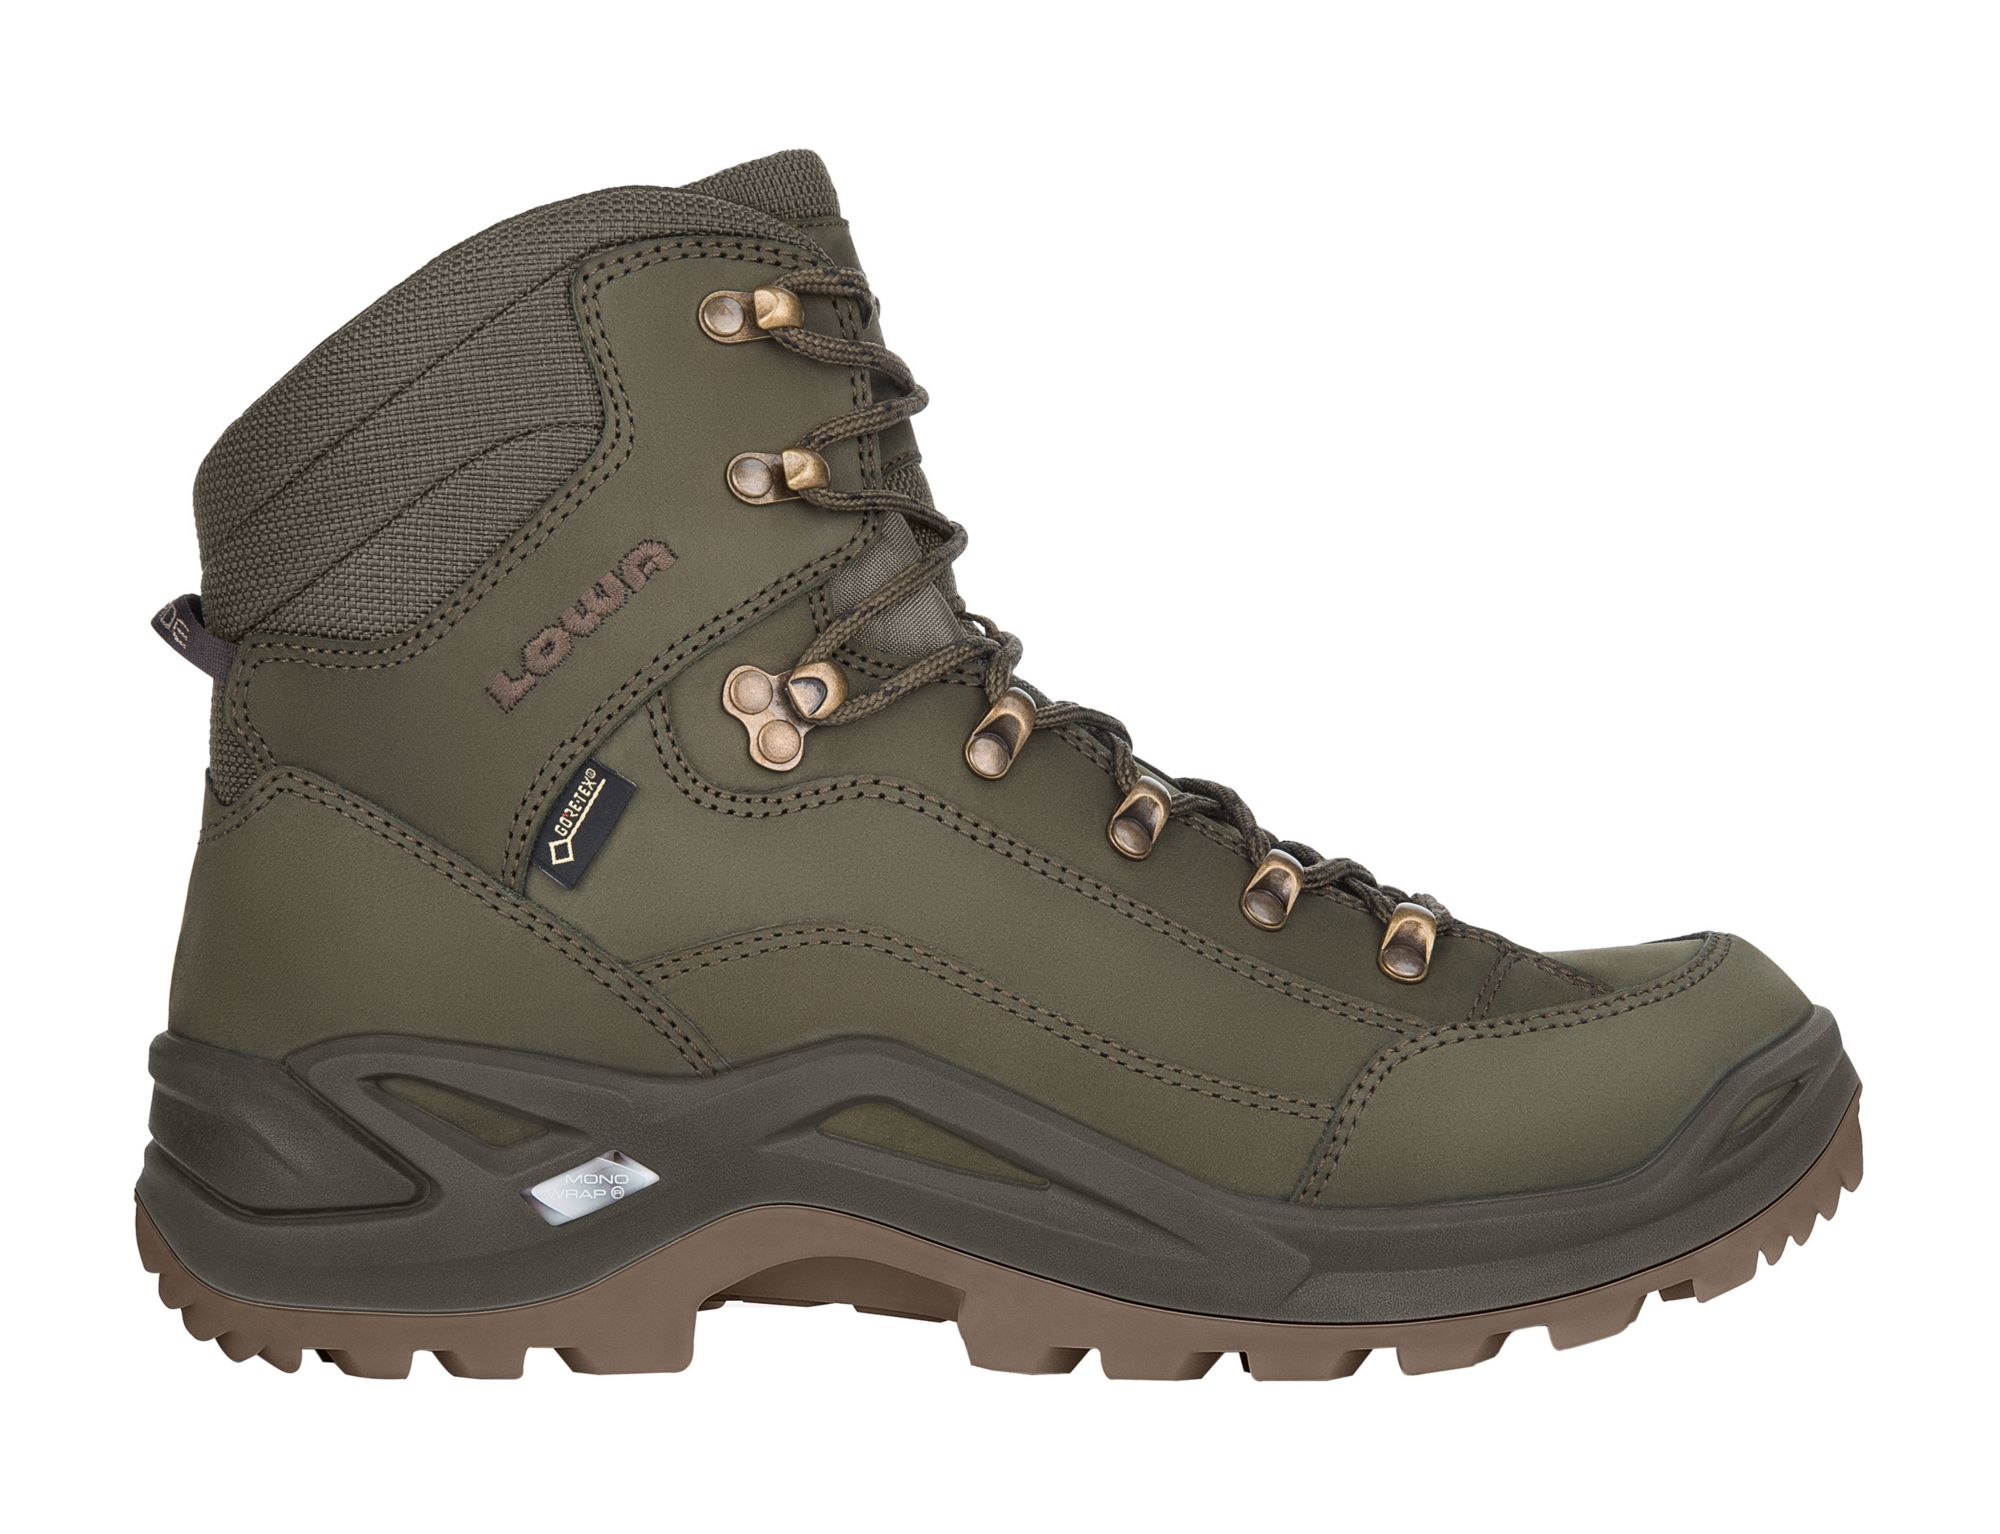 Photos - Trekking Shoes LOWA Men's Renegade GTX Mid Boots, Size 12, Basil | Father's Day Gift Idea 